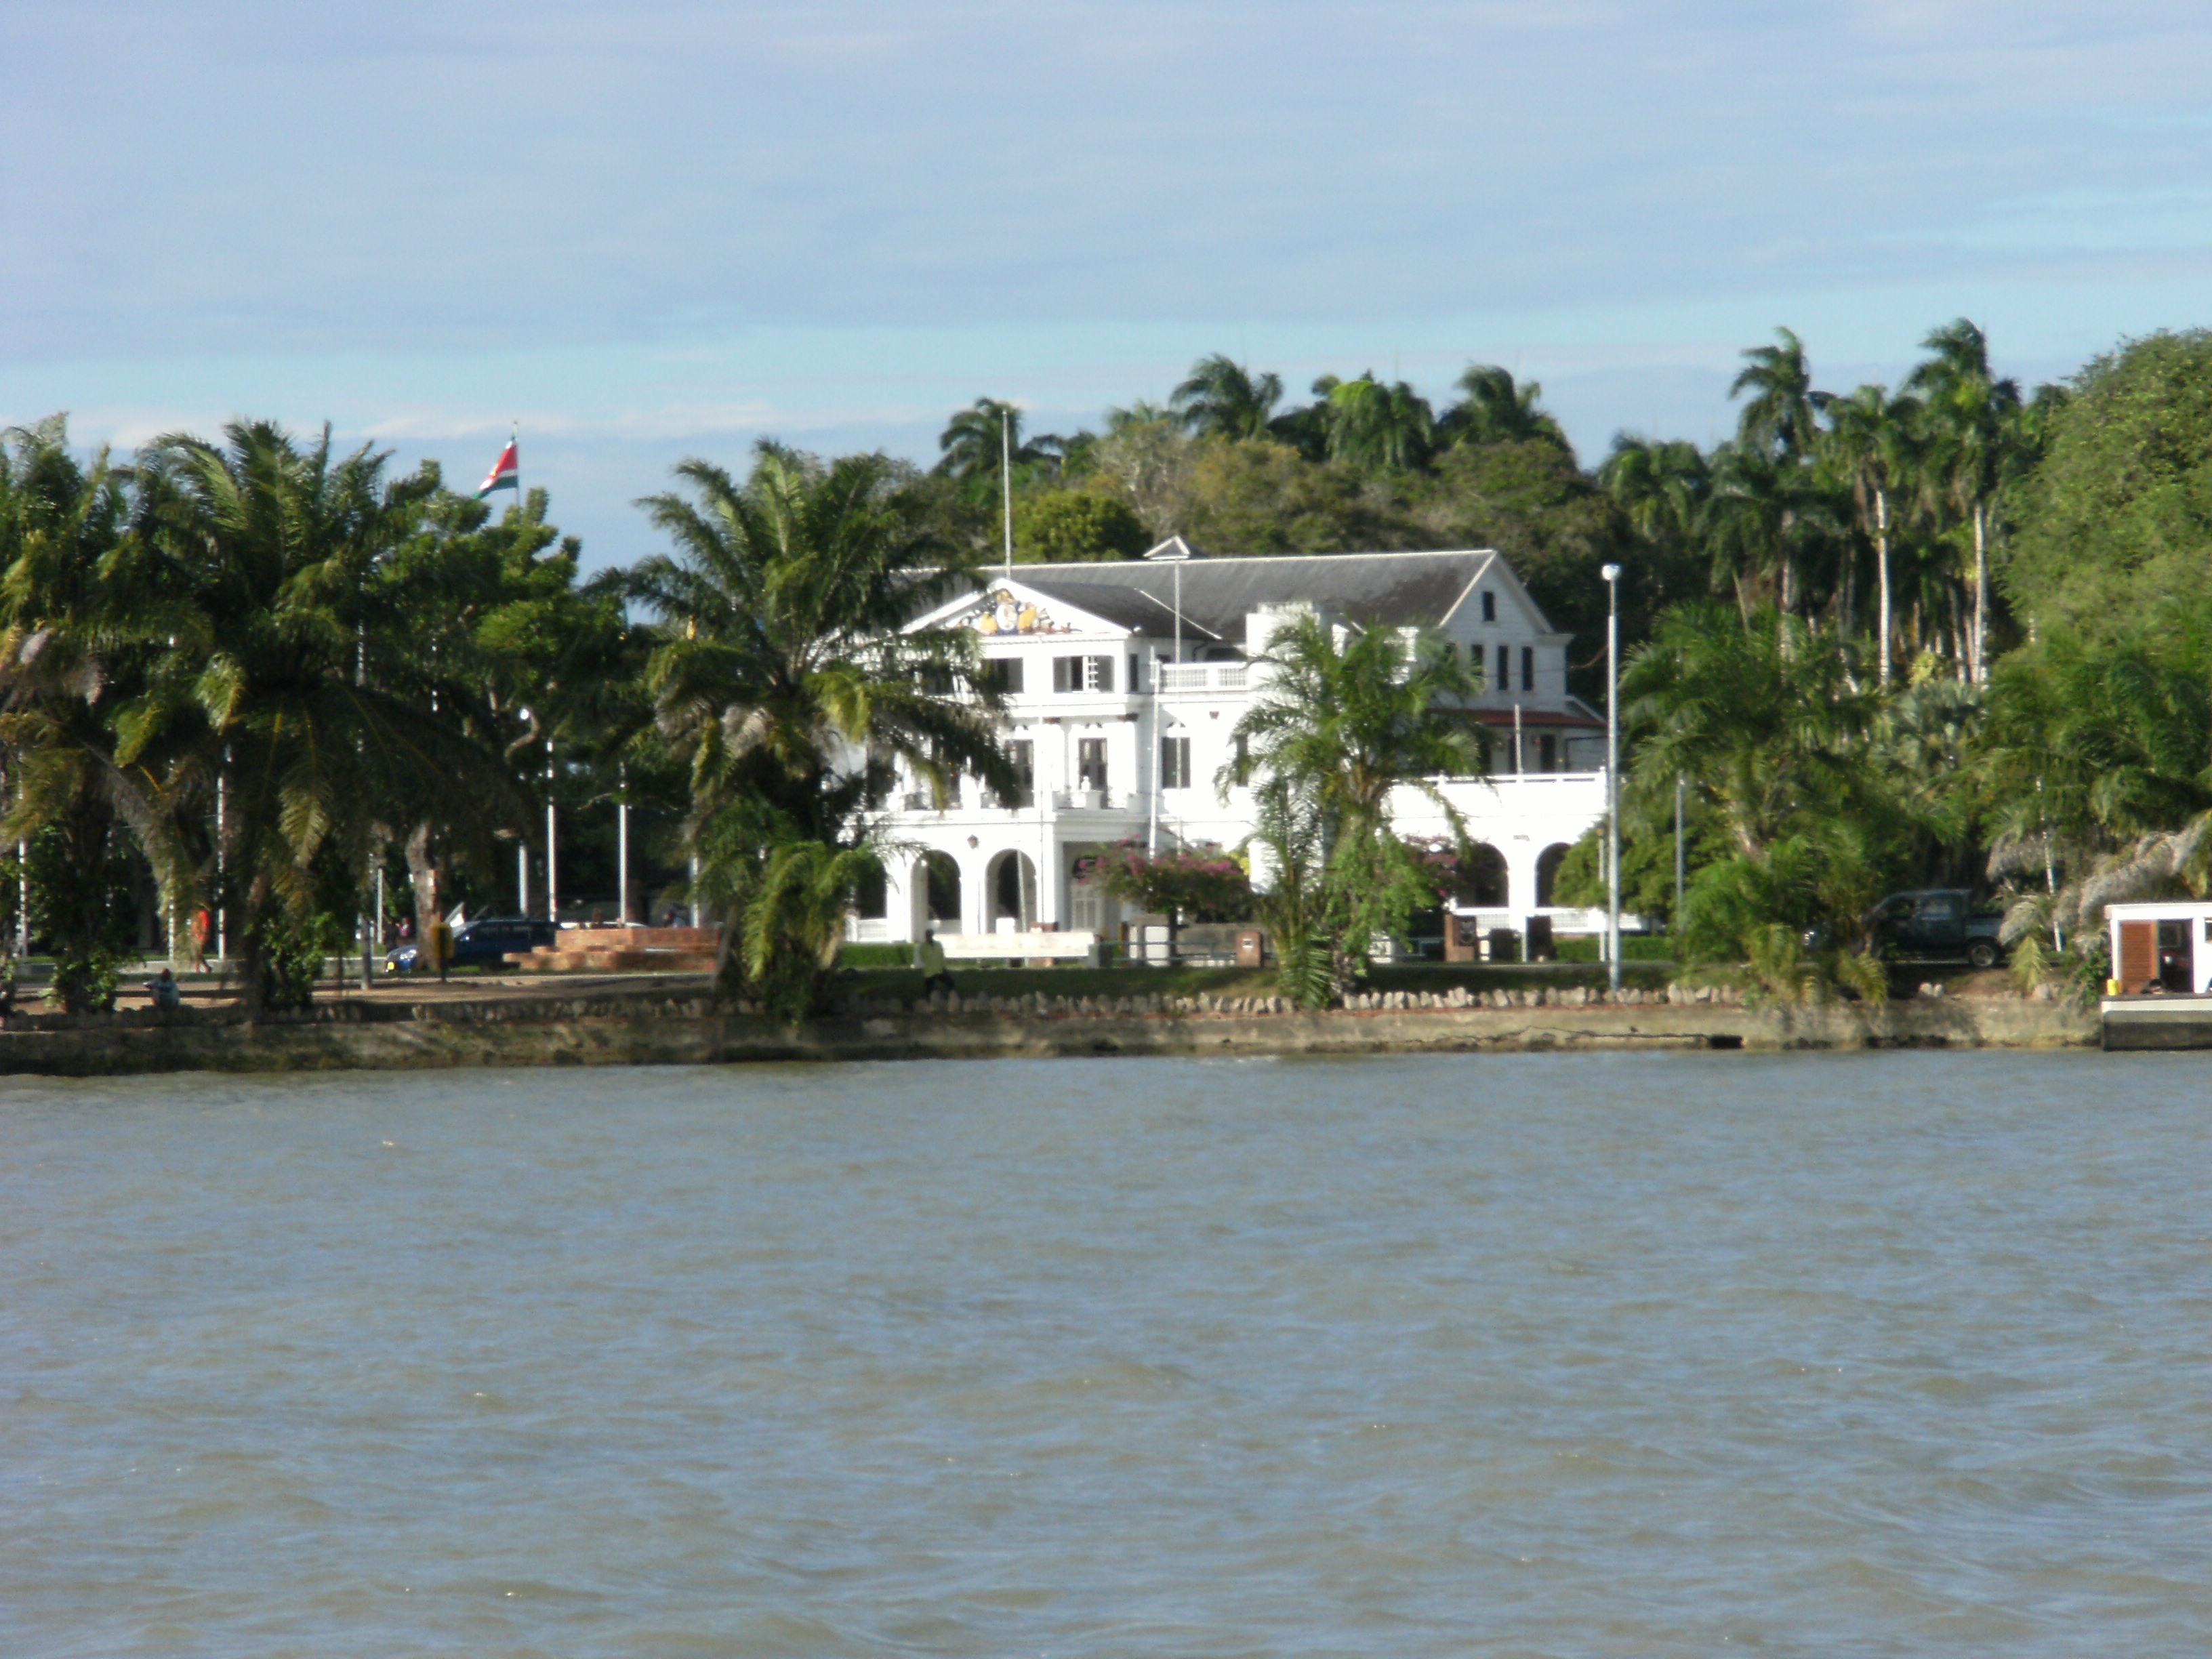 Presidential palace seen from Suriname